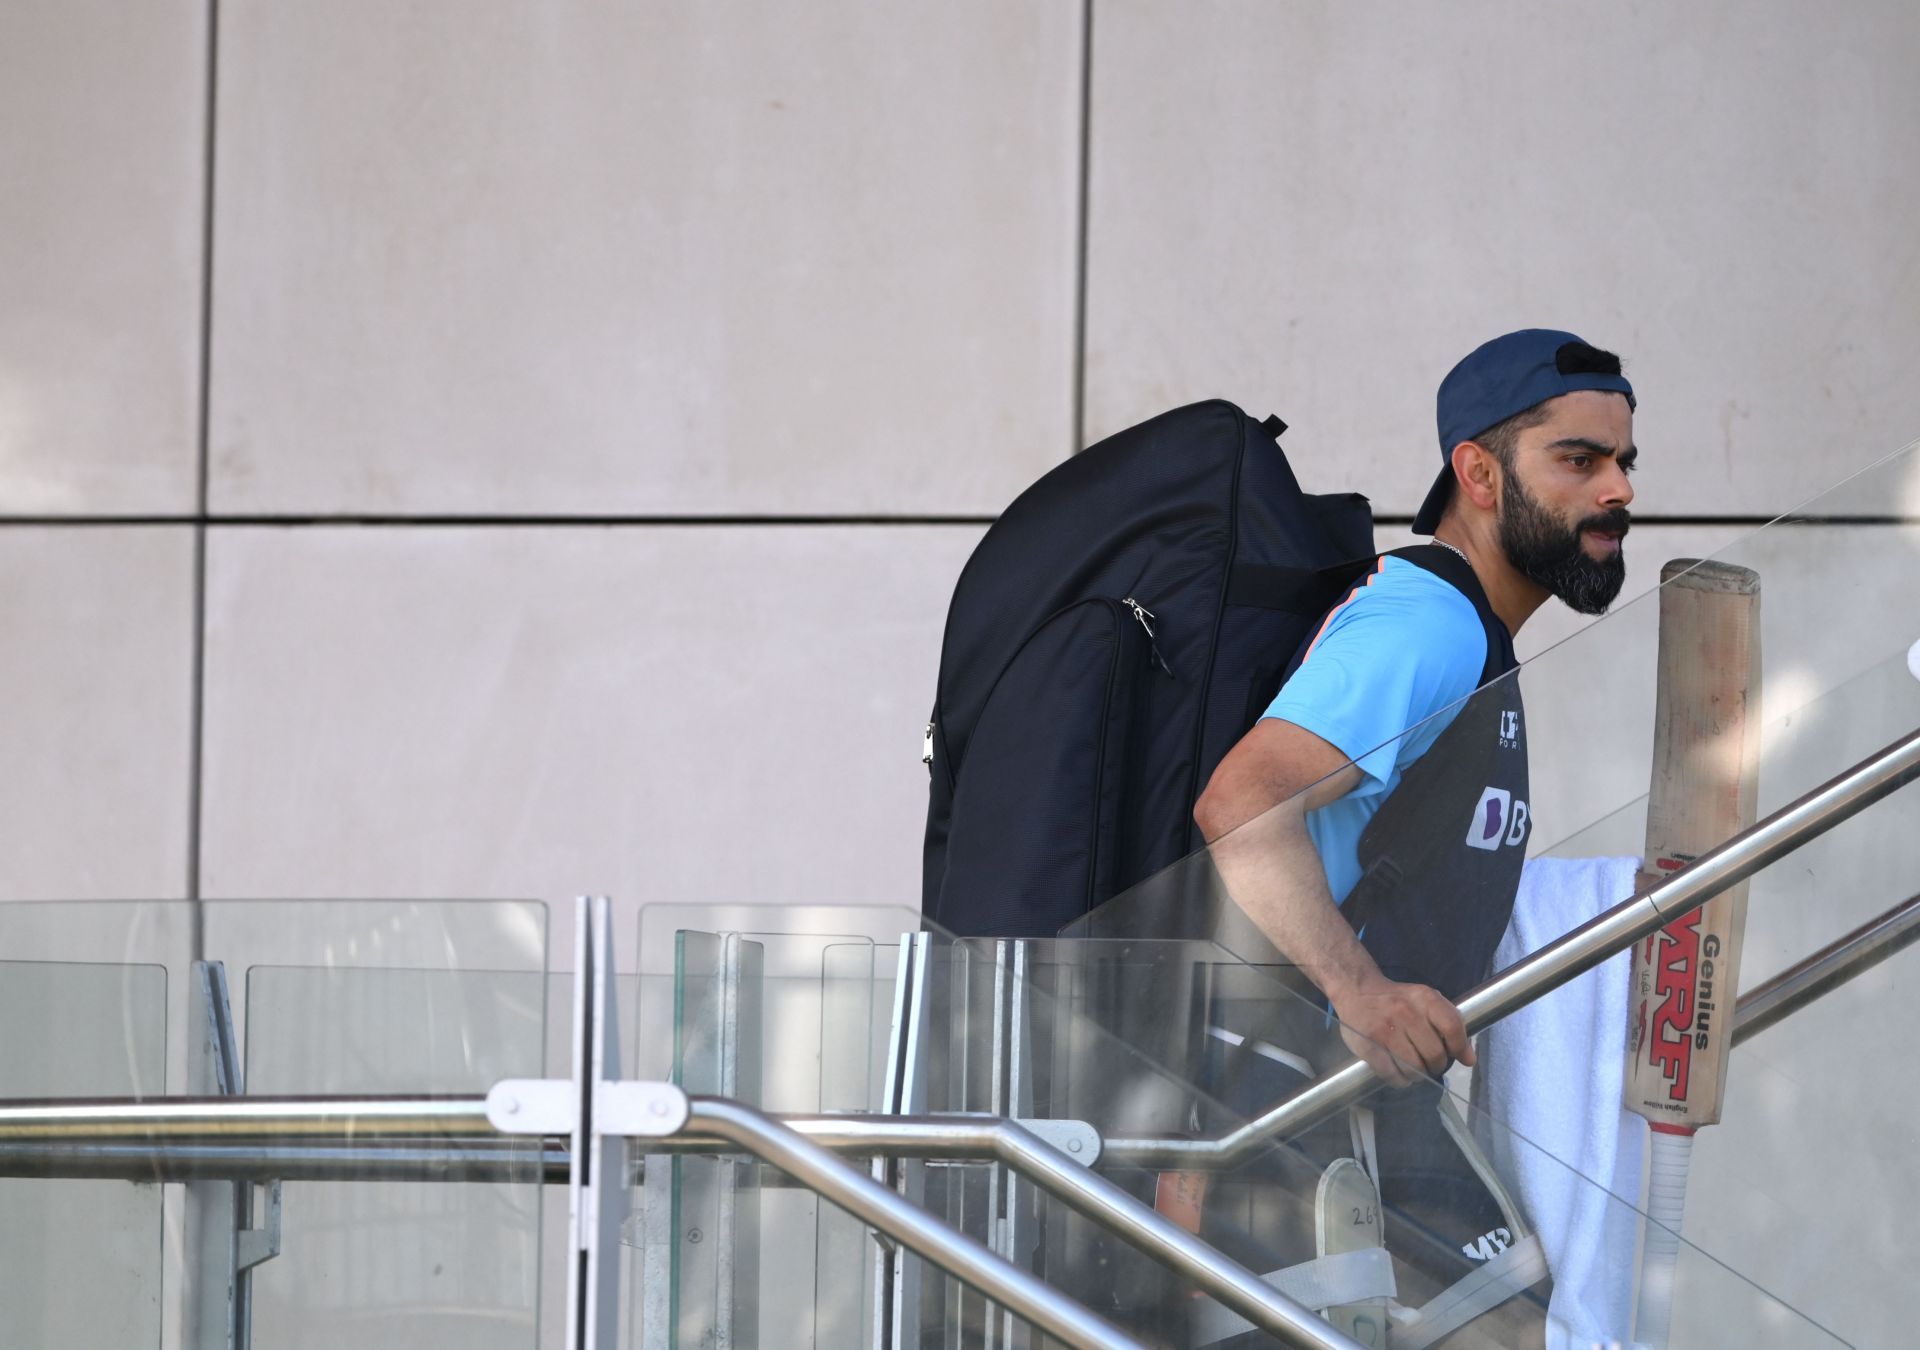 Virat Kohli will be seen in action on July 1 against England. (Pic: Getty)